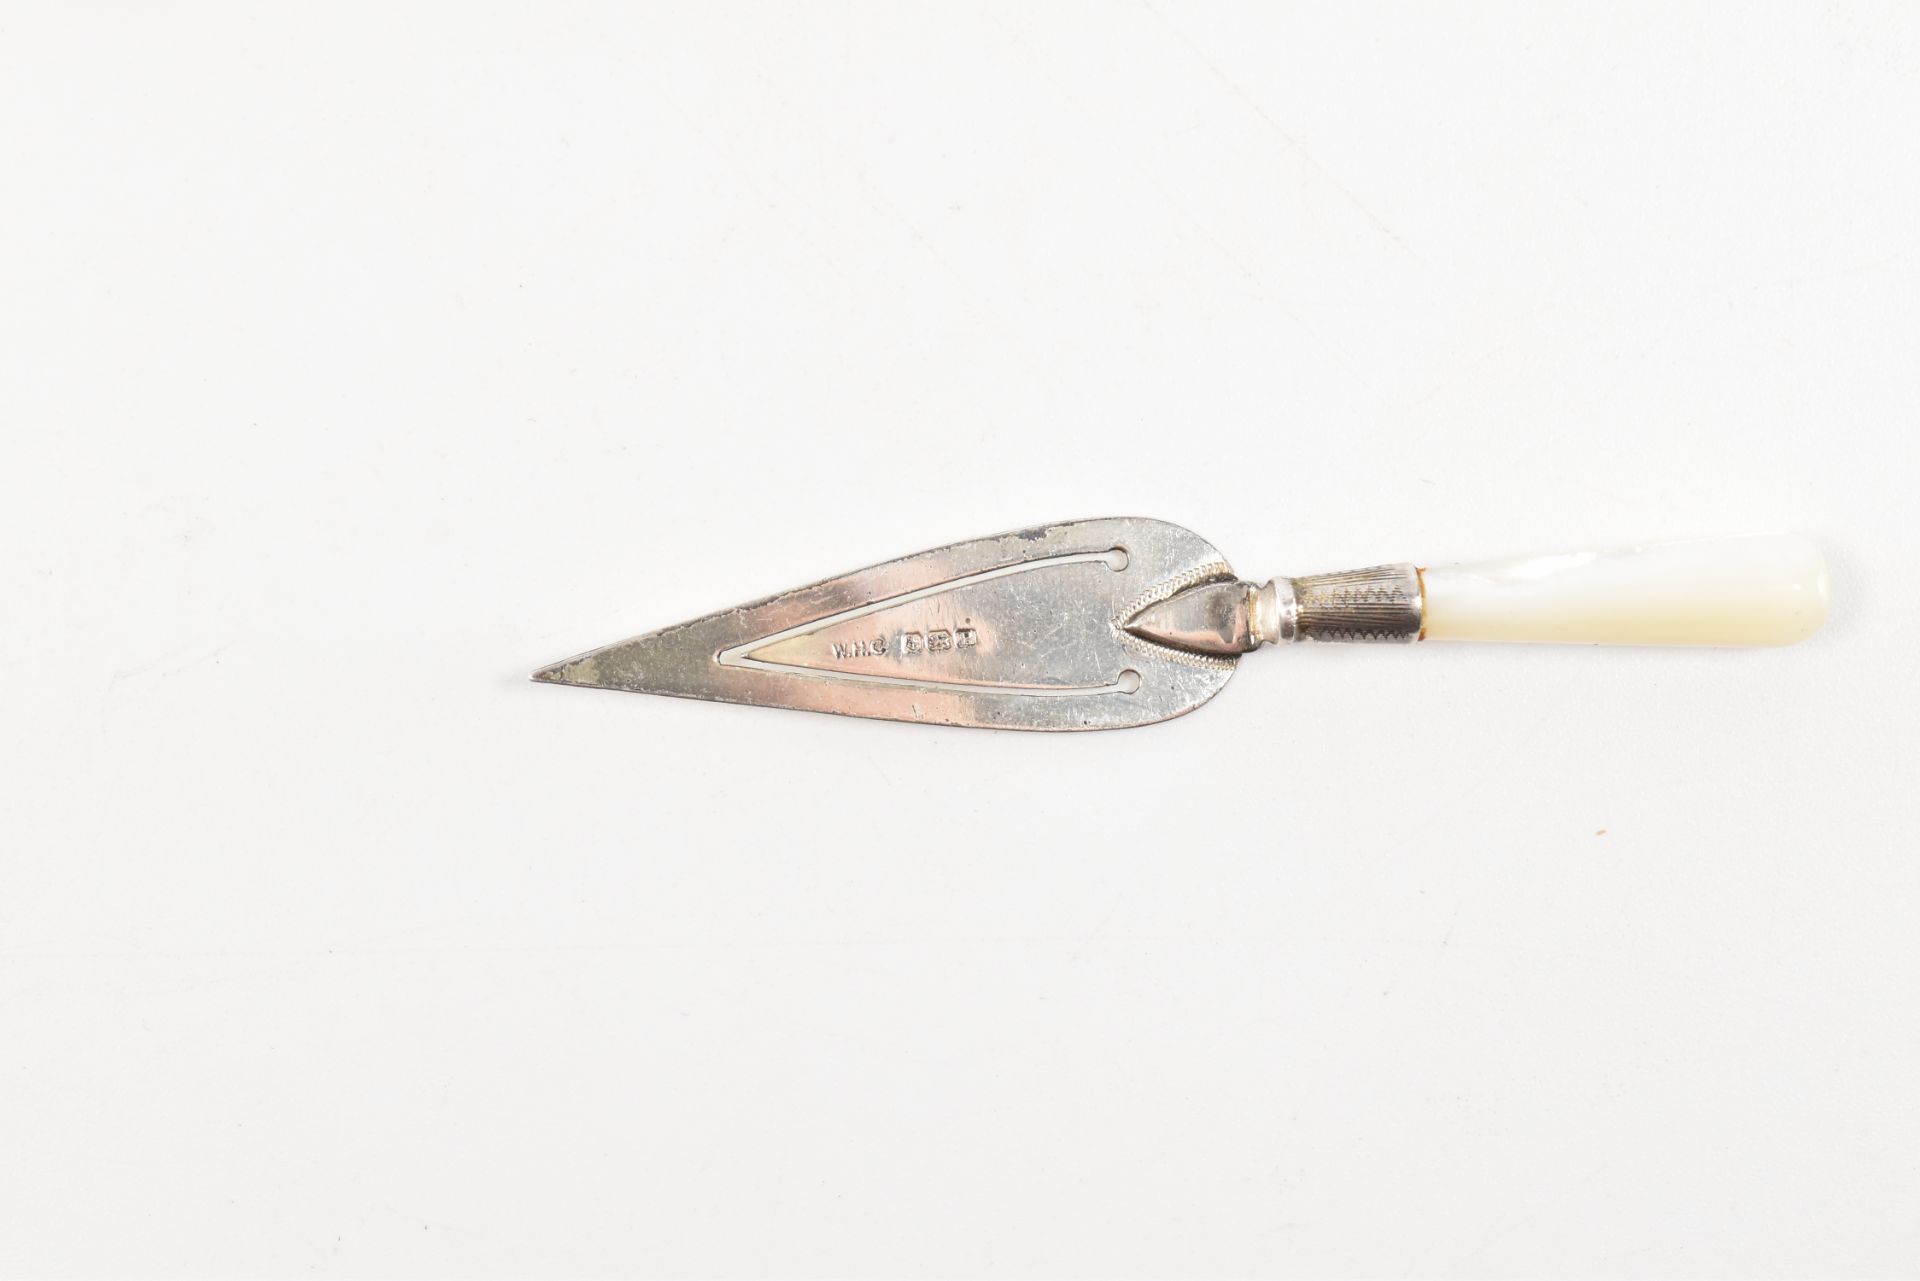 TWO SILVER MID CENTURY BOOKMARKS IN THE SHAPE OF A TROWEL - Image 3 of 4